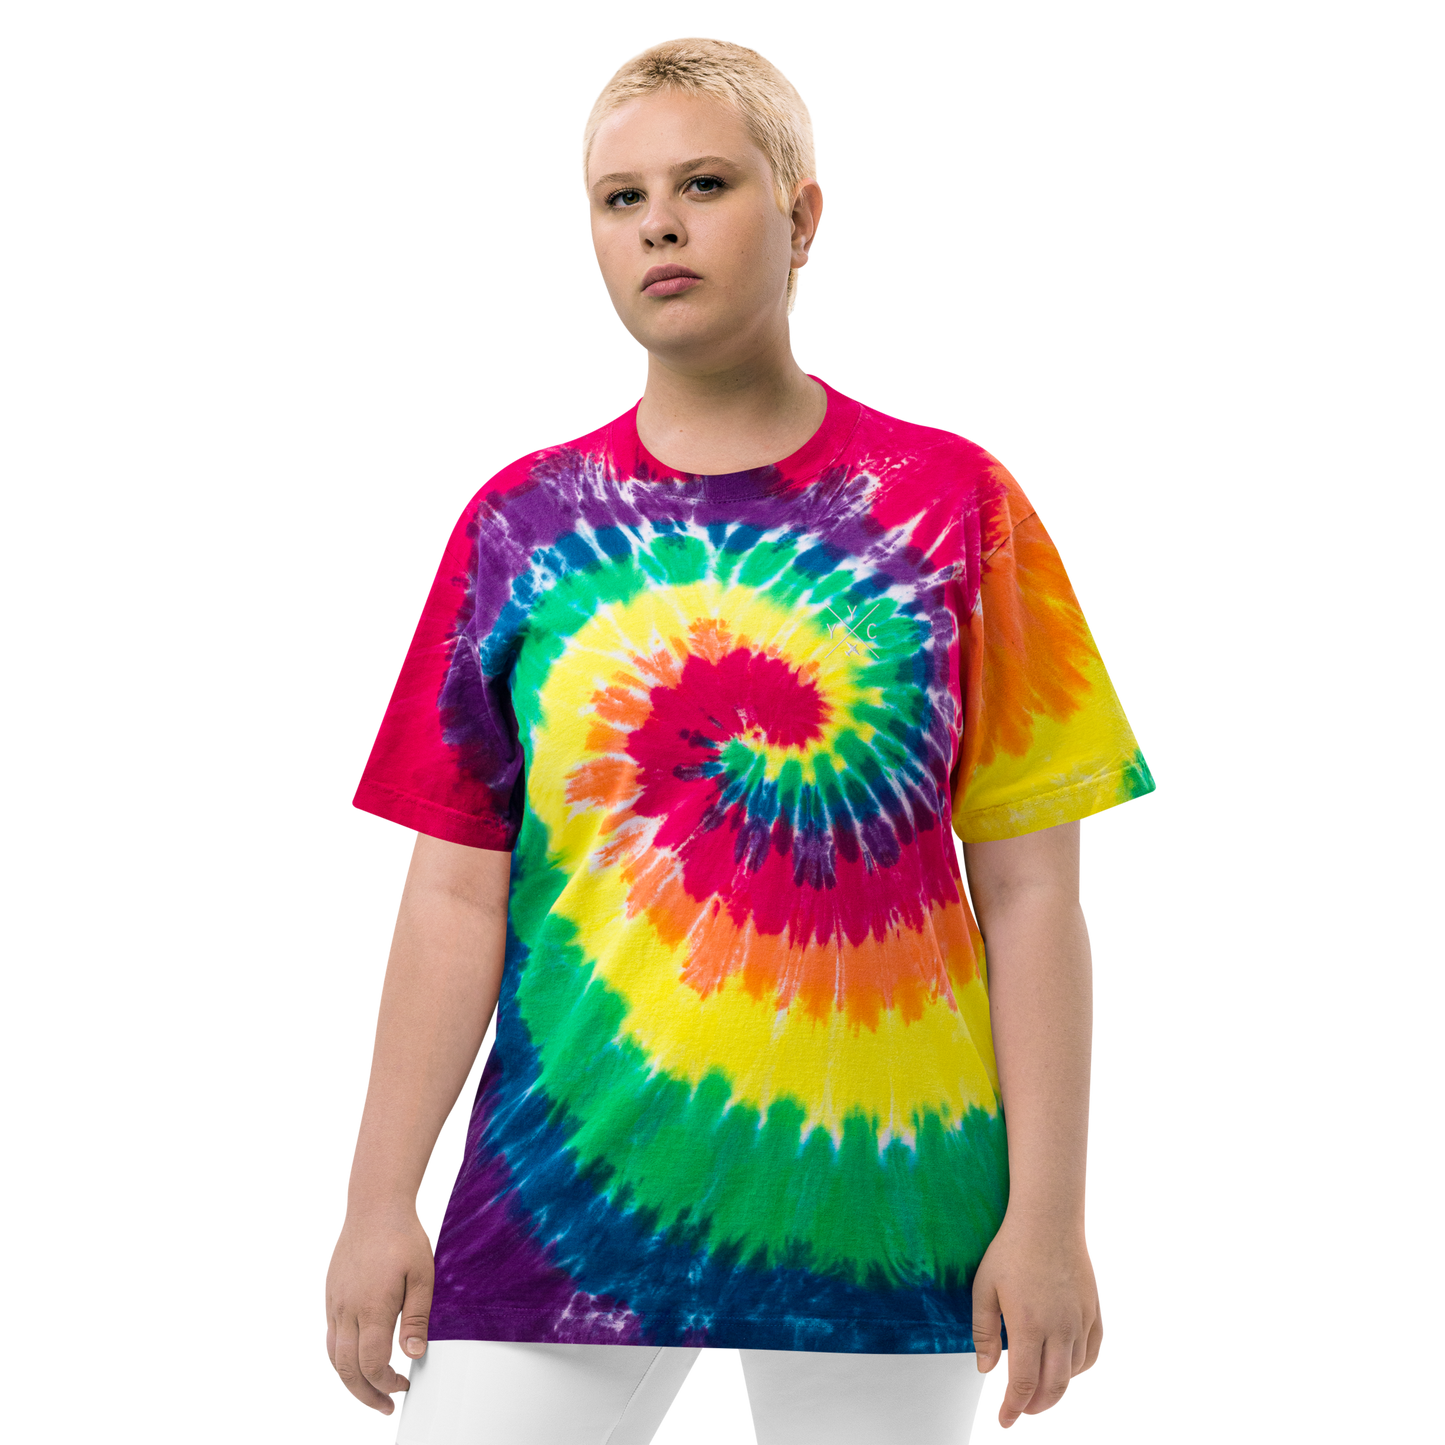 YHM Designs - YYC Calgary Oversized Tie-Dye T-Shirt - Crossed-X Design with Airport Code and Vintage Propliner - White Embroidery - Image 01